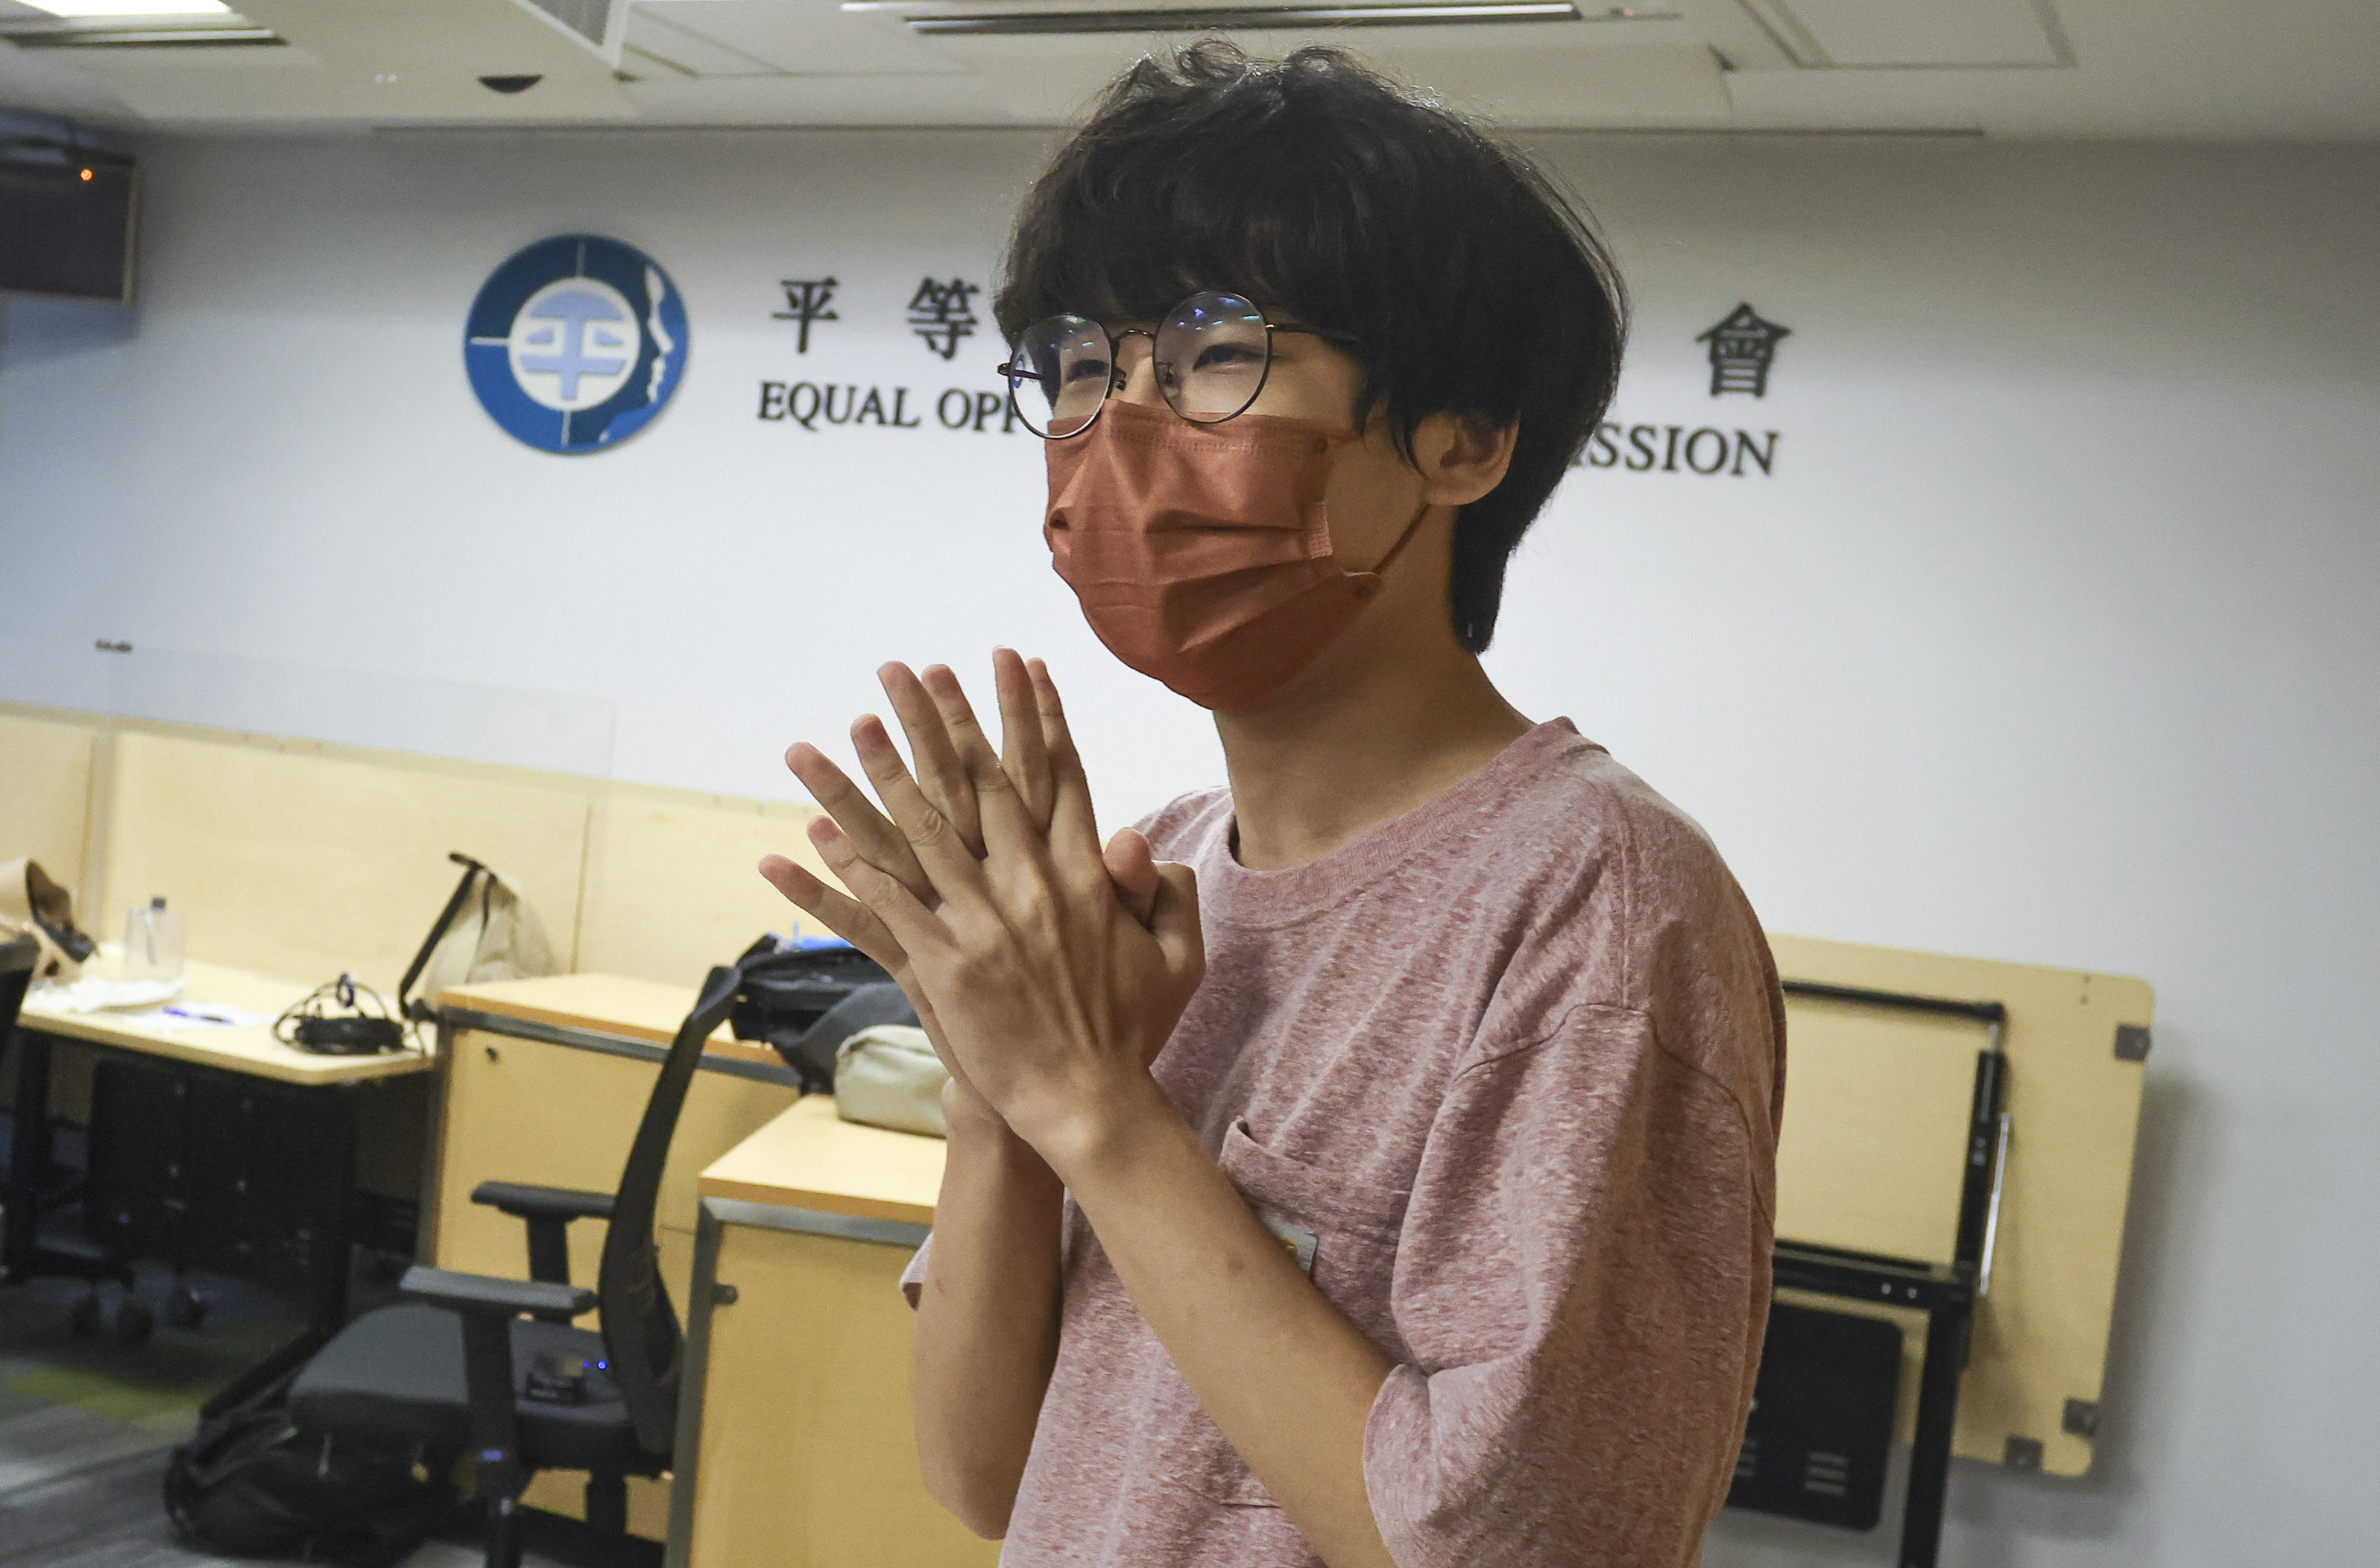 HKUST bans game where students lift one person and bang their